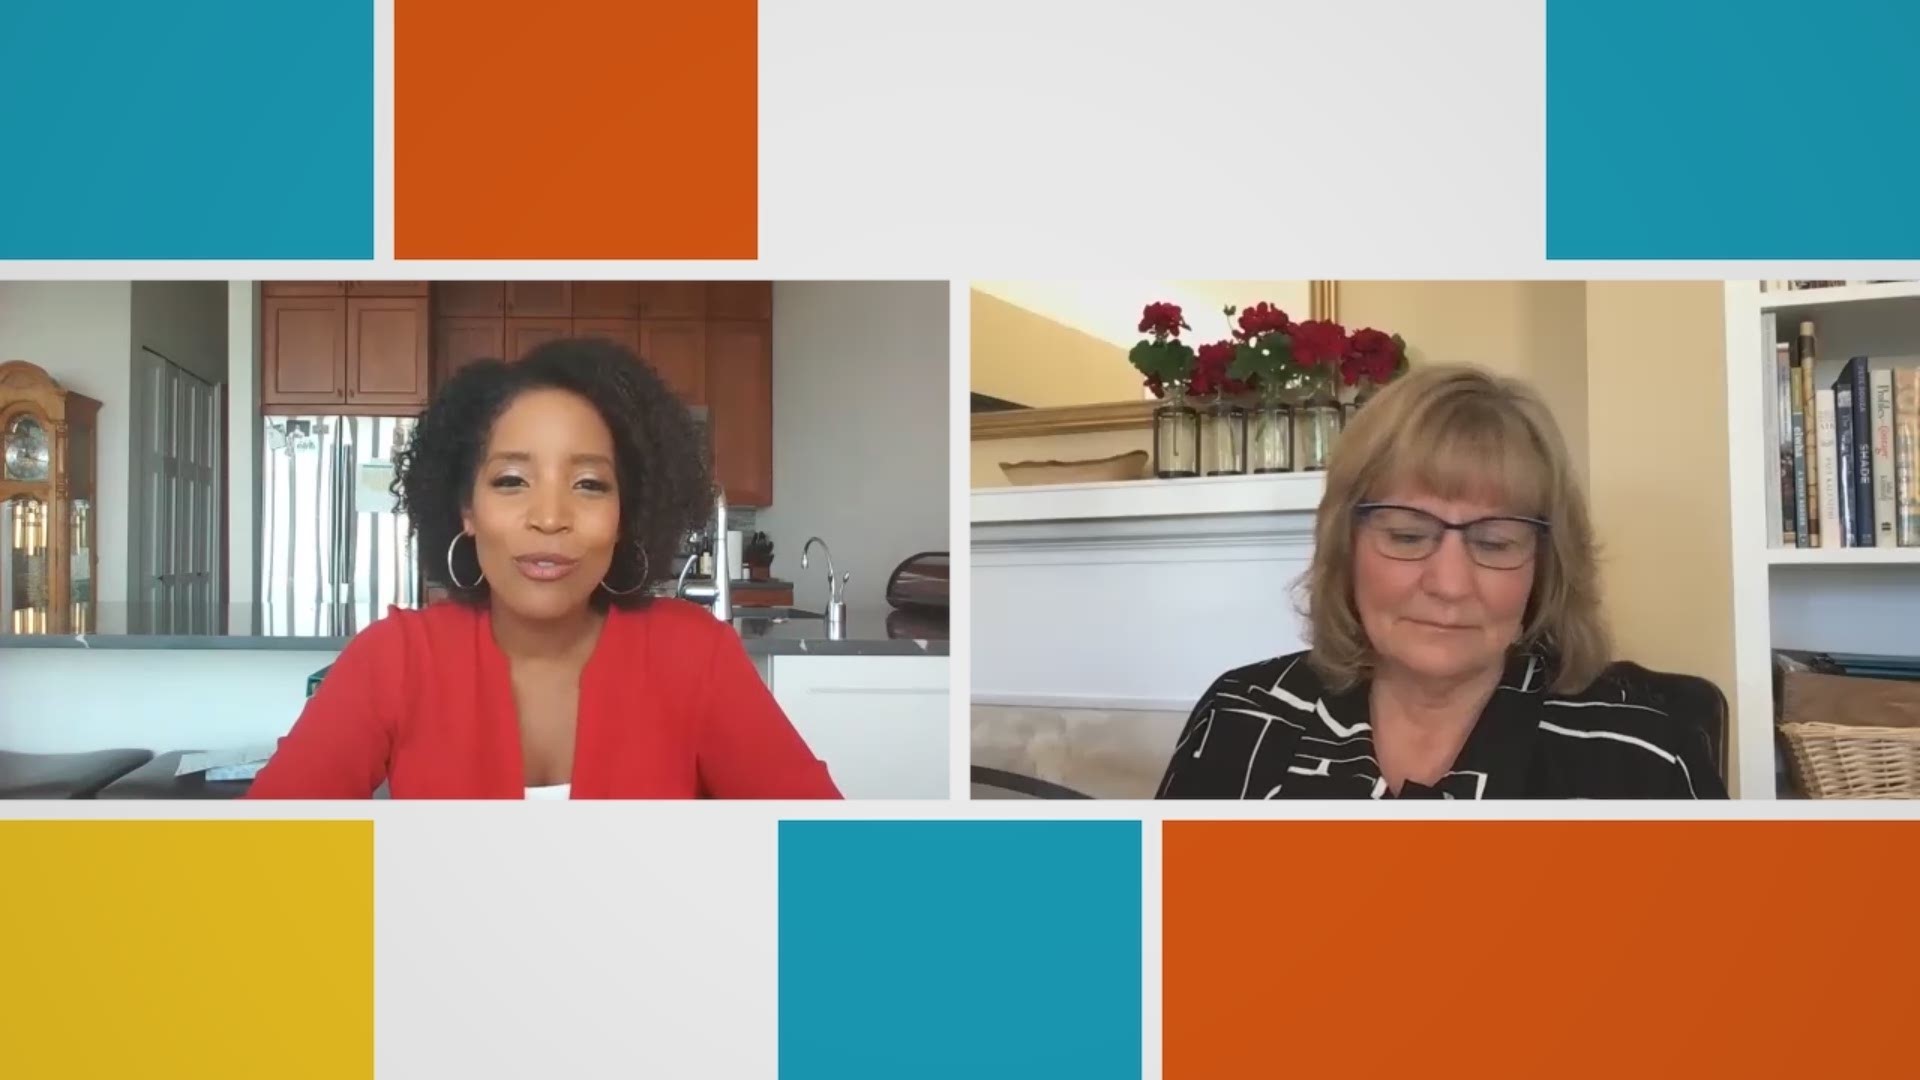 Watch Angela Poe Russell's full conversation with Trudi Inslee